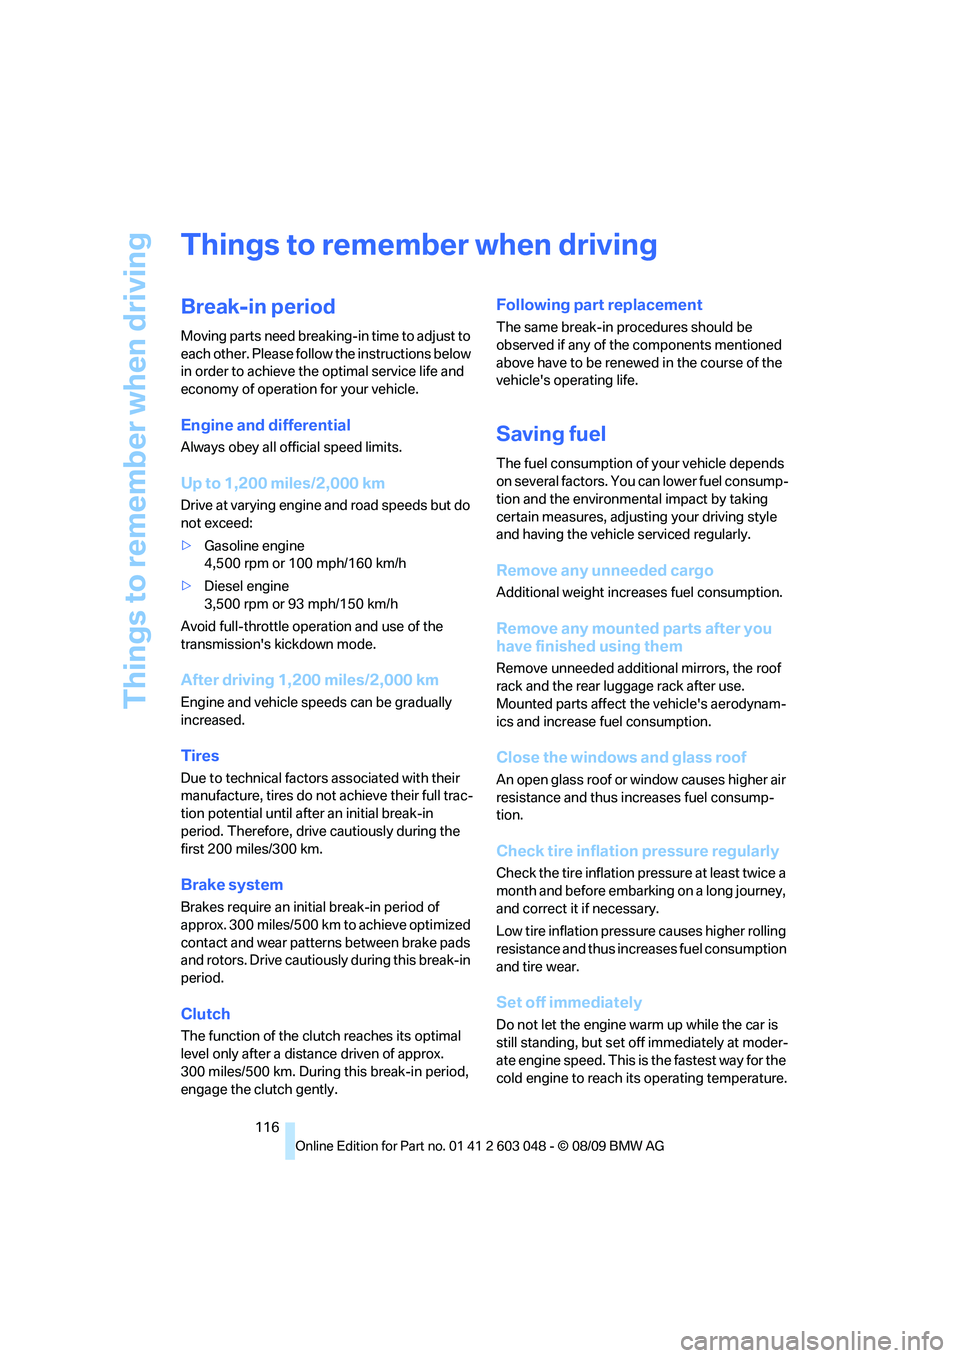 BMW 3 SERIES 2010  Owners Manual Things to remember when driving
116
Things to remember when driving
Break-in period
Moving parts need breaking-in time to adjust to 
each other. Please follow the instructions below 
in order to achie